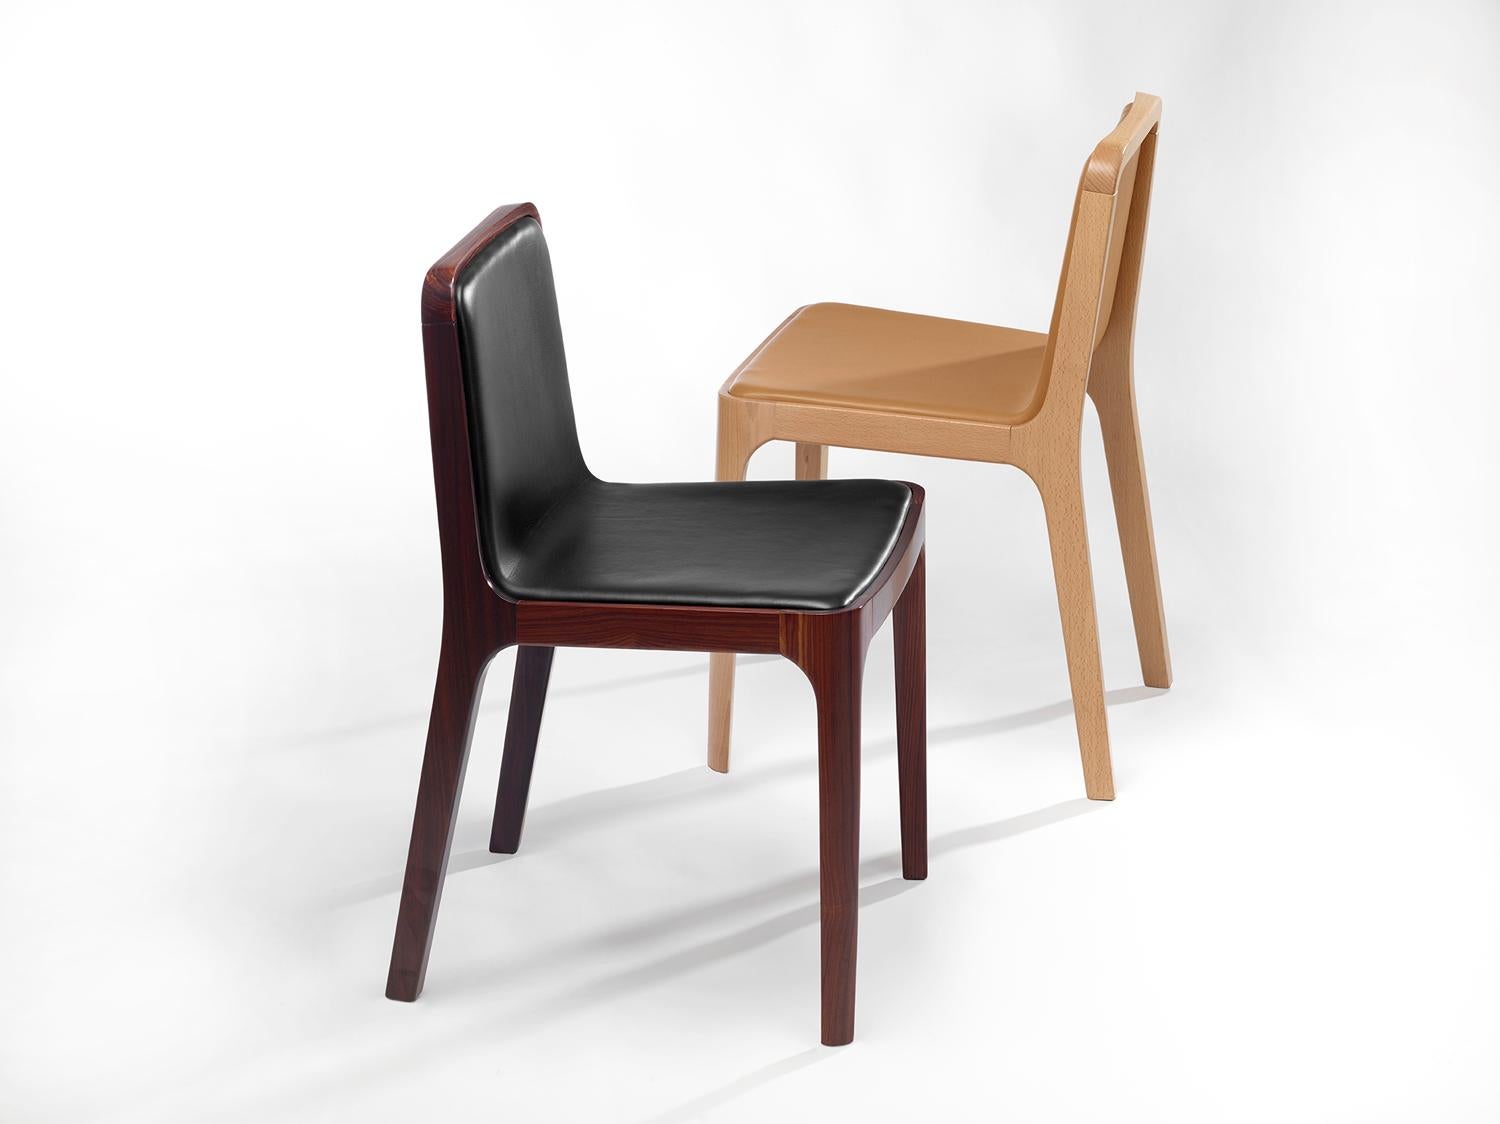 Minimalist Modern Chair - Ash Wood/Walnut Stained Finnishing Leather Upholstery For Sale 5